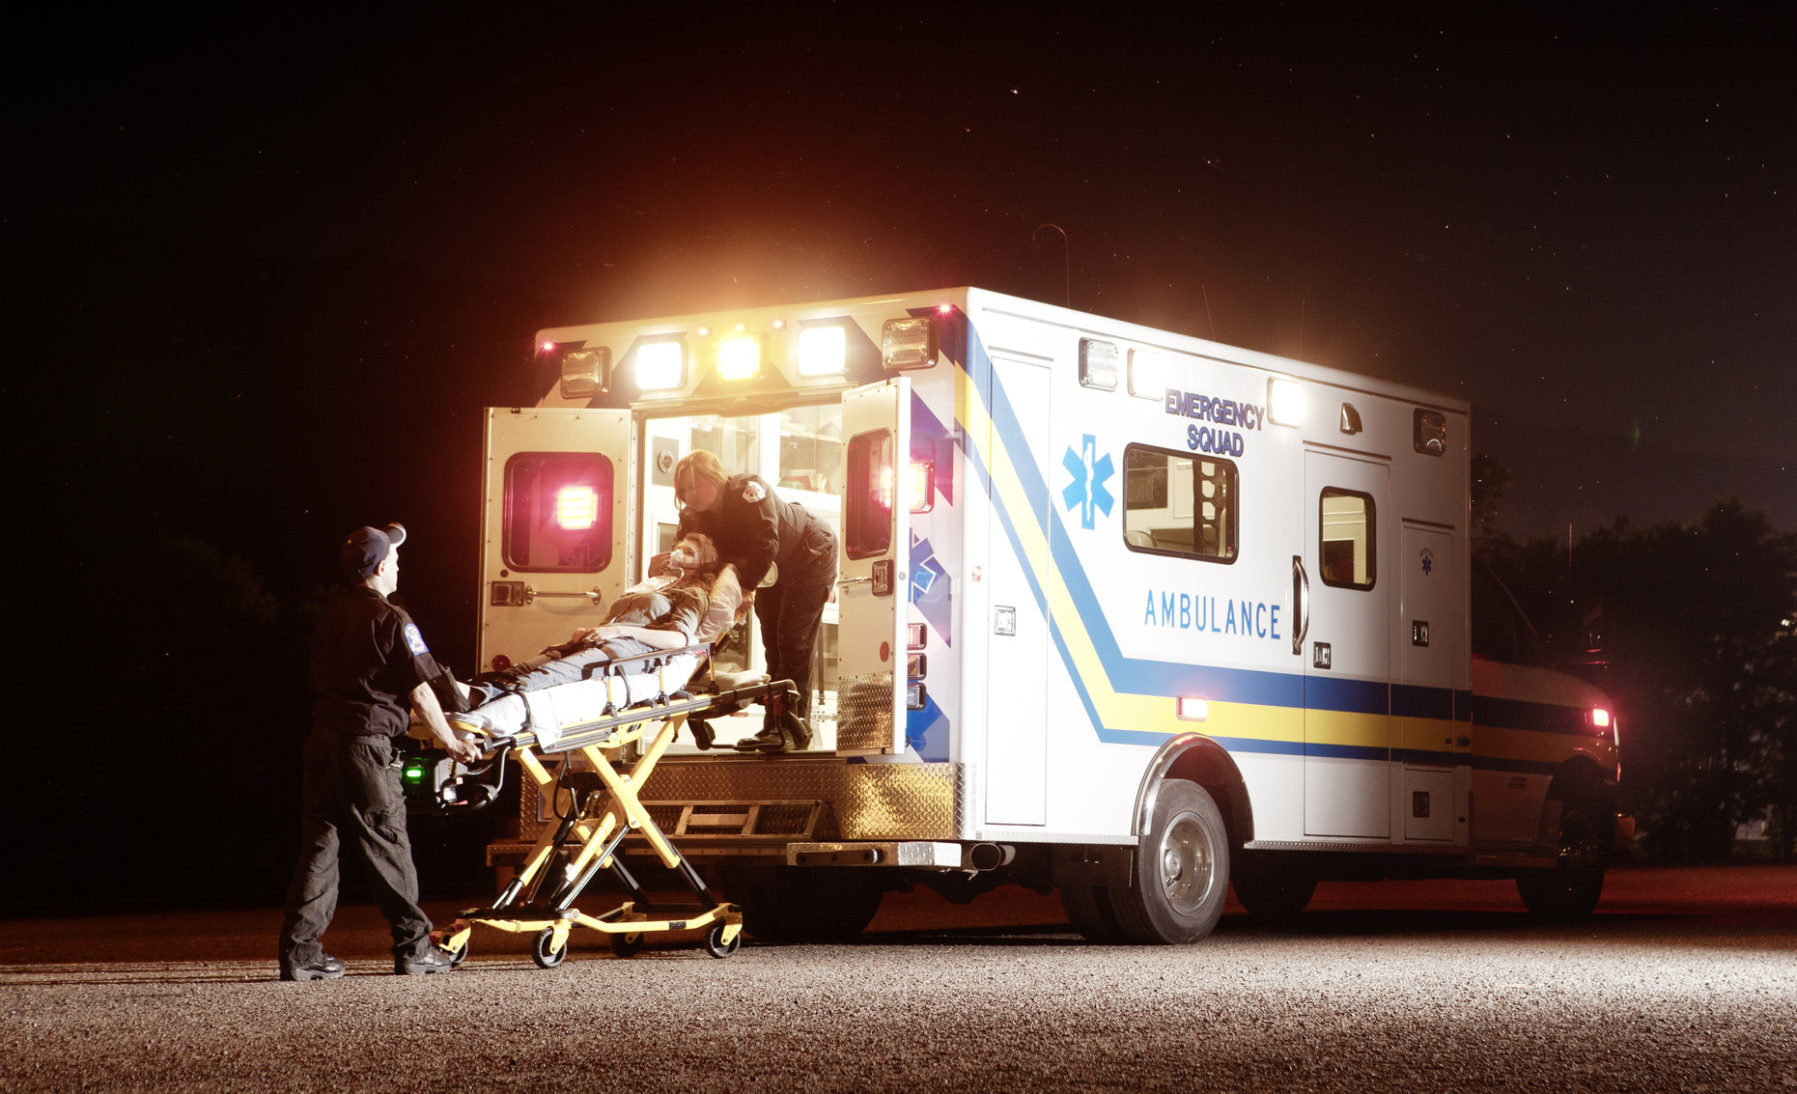 Paramedics And Other First Responders Have Specific HD Wallpaper